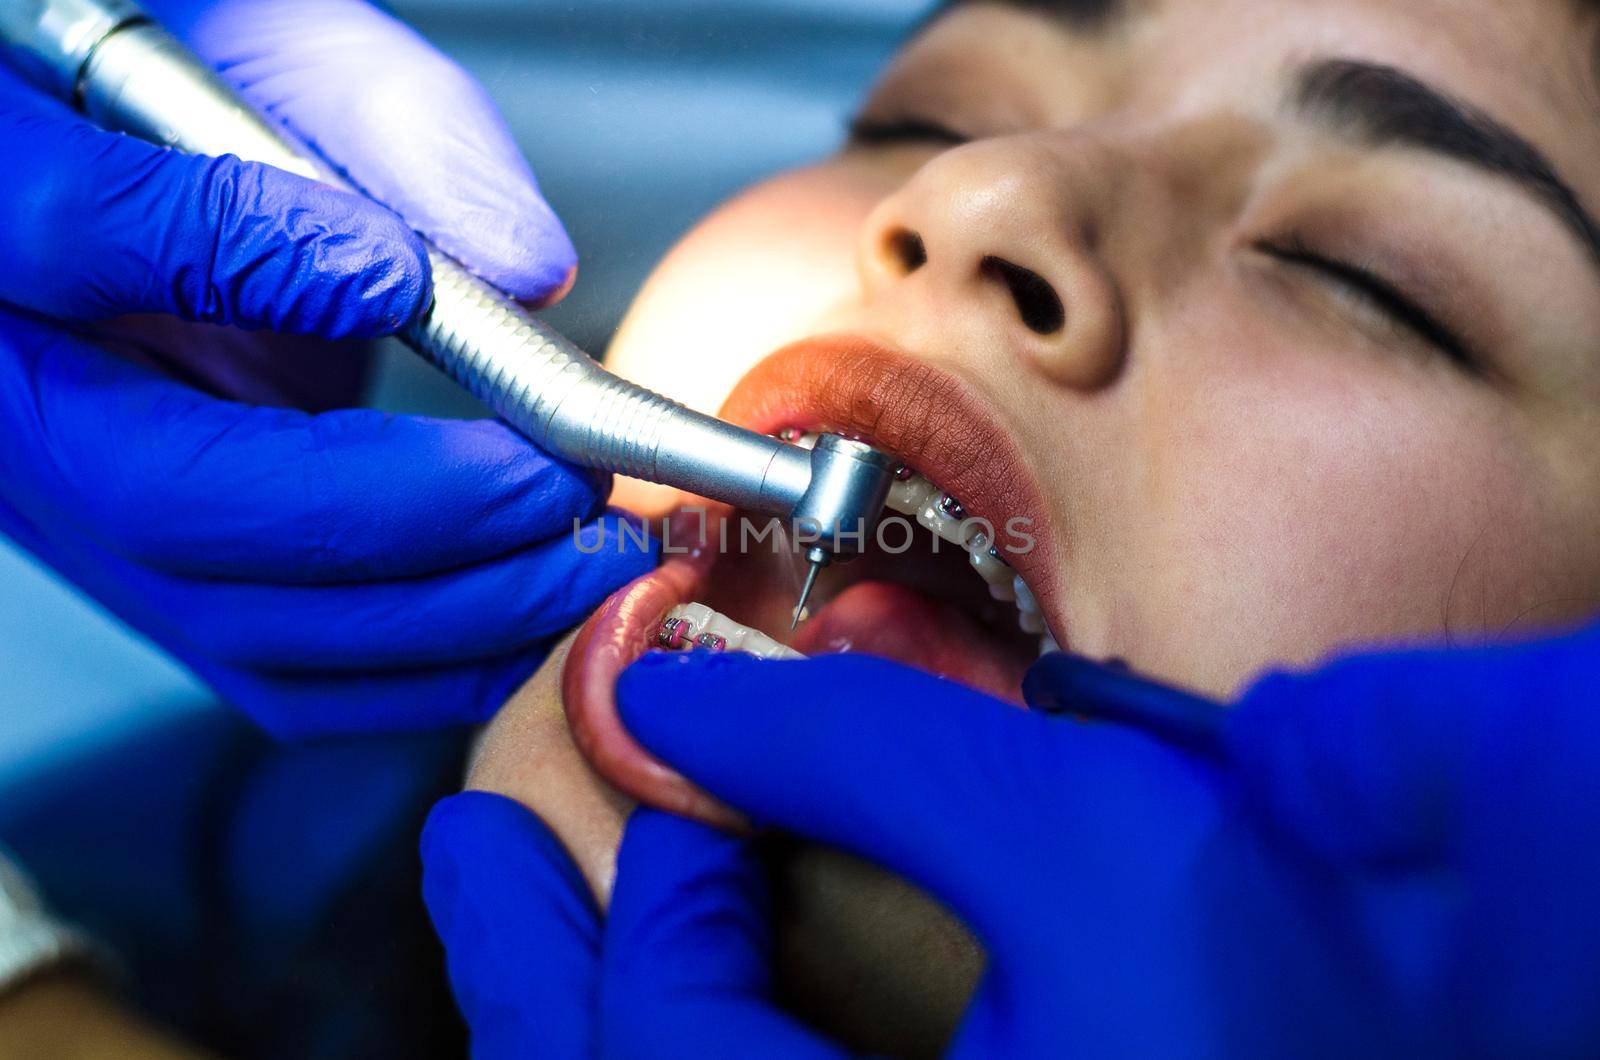 Female patient at dental procedure using dental drill by Peruphotoart